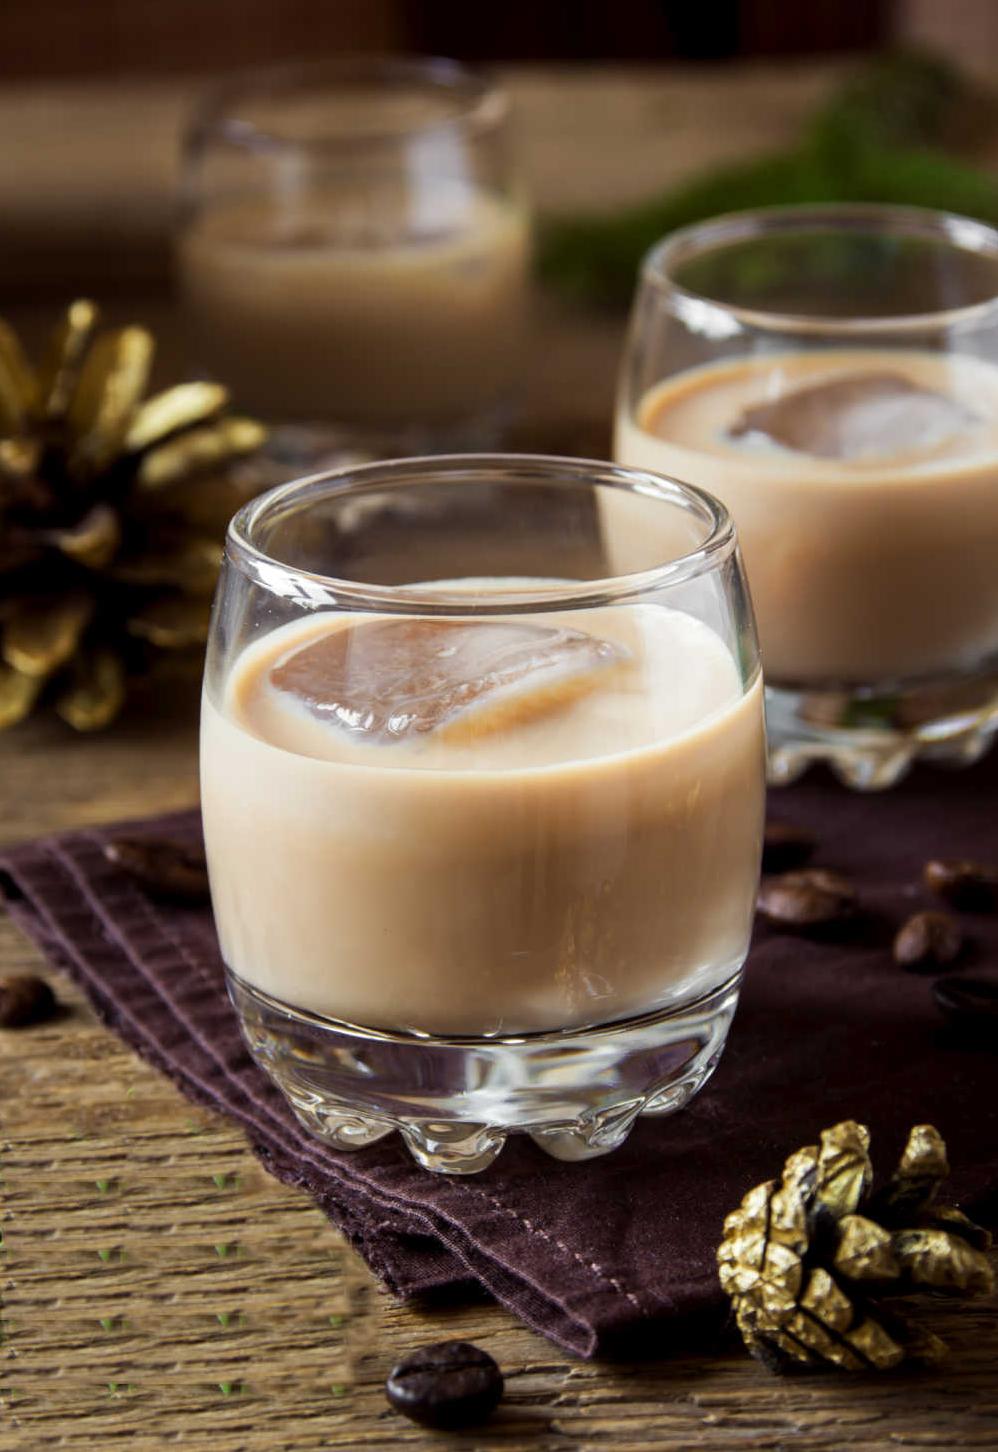  Satisfy your sweet tooth with this delightful homemade Irish cream.